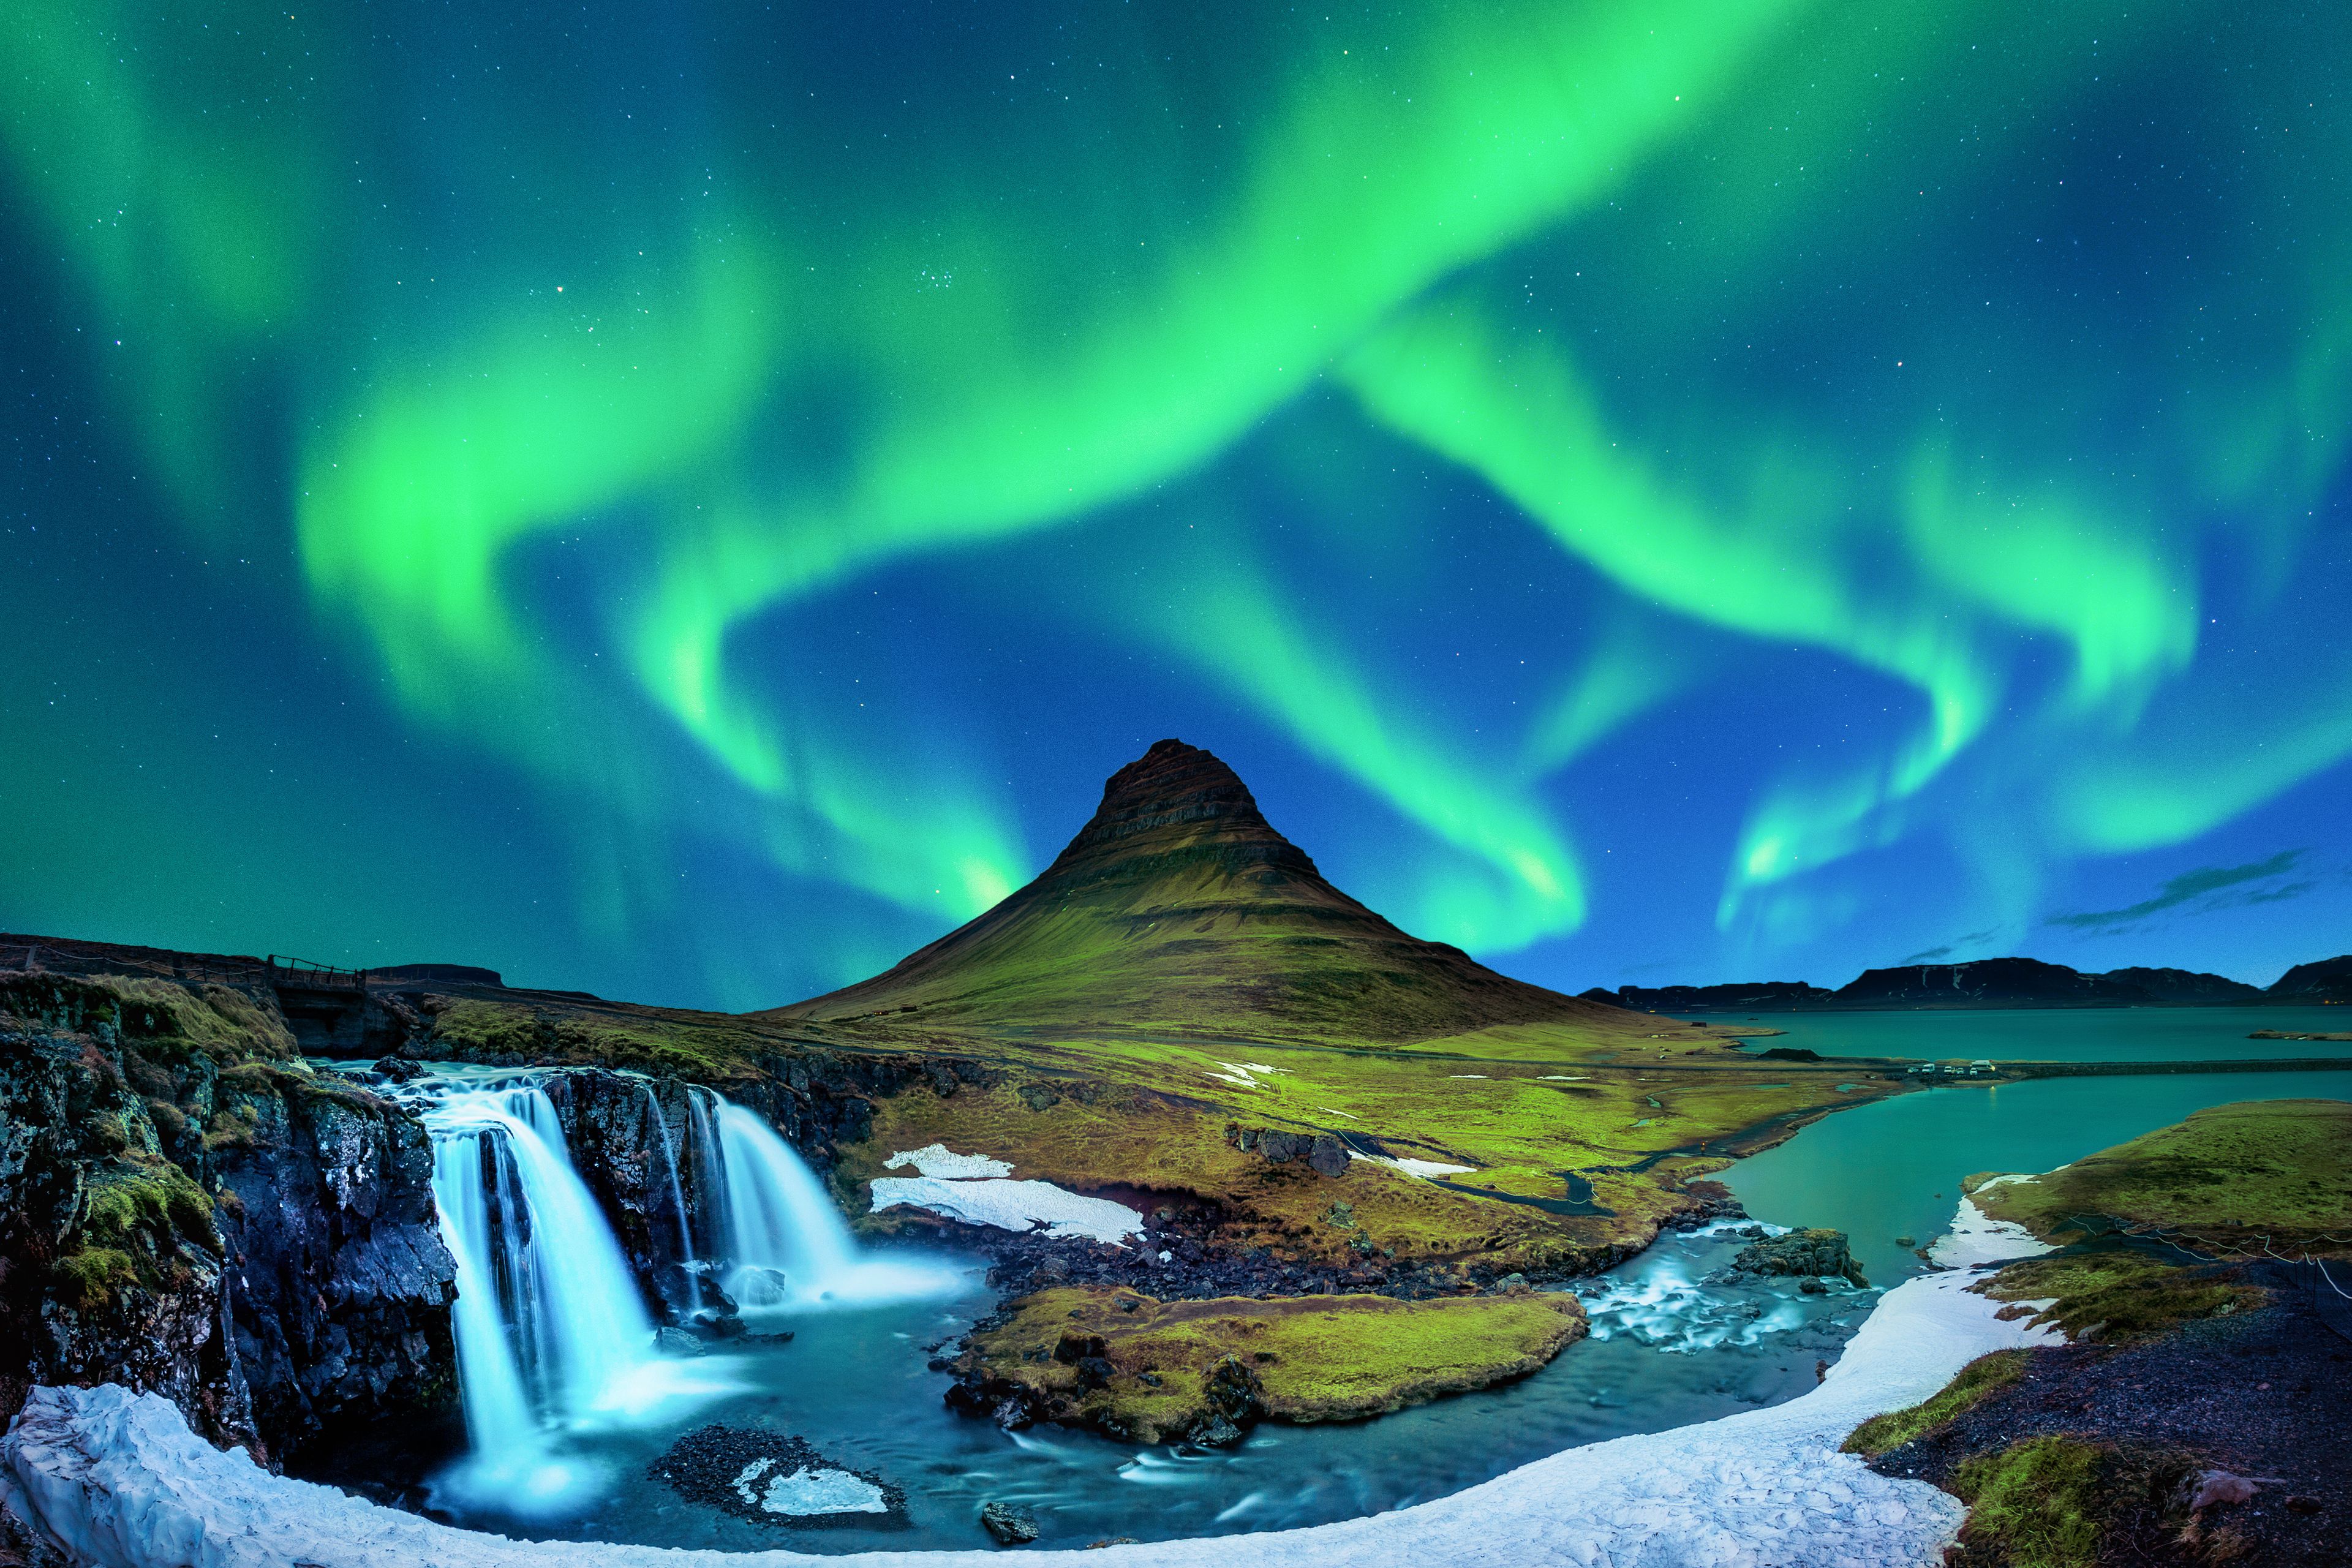 Picture of the Northern Lights over Kirkjufell mountain in Iceland